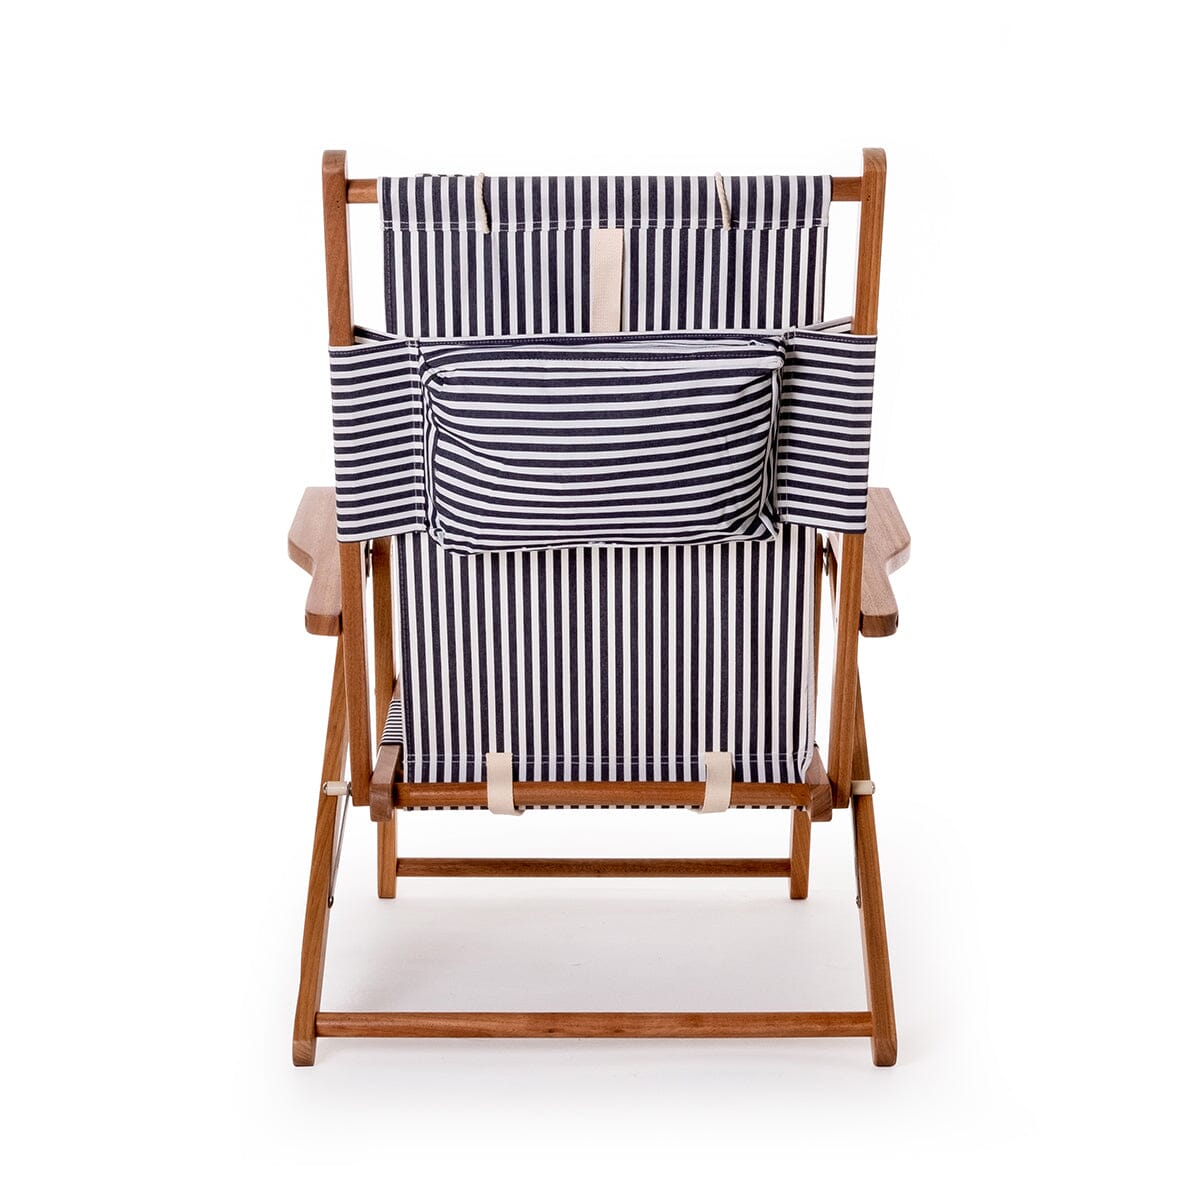 The Tommy Chair - Lauren's Navy Stripe Tommy Chair Business & Pleasure Co 